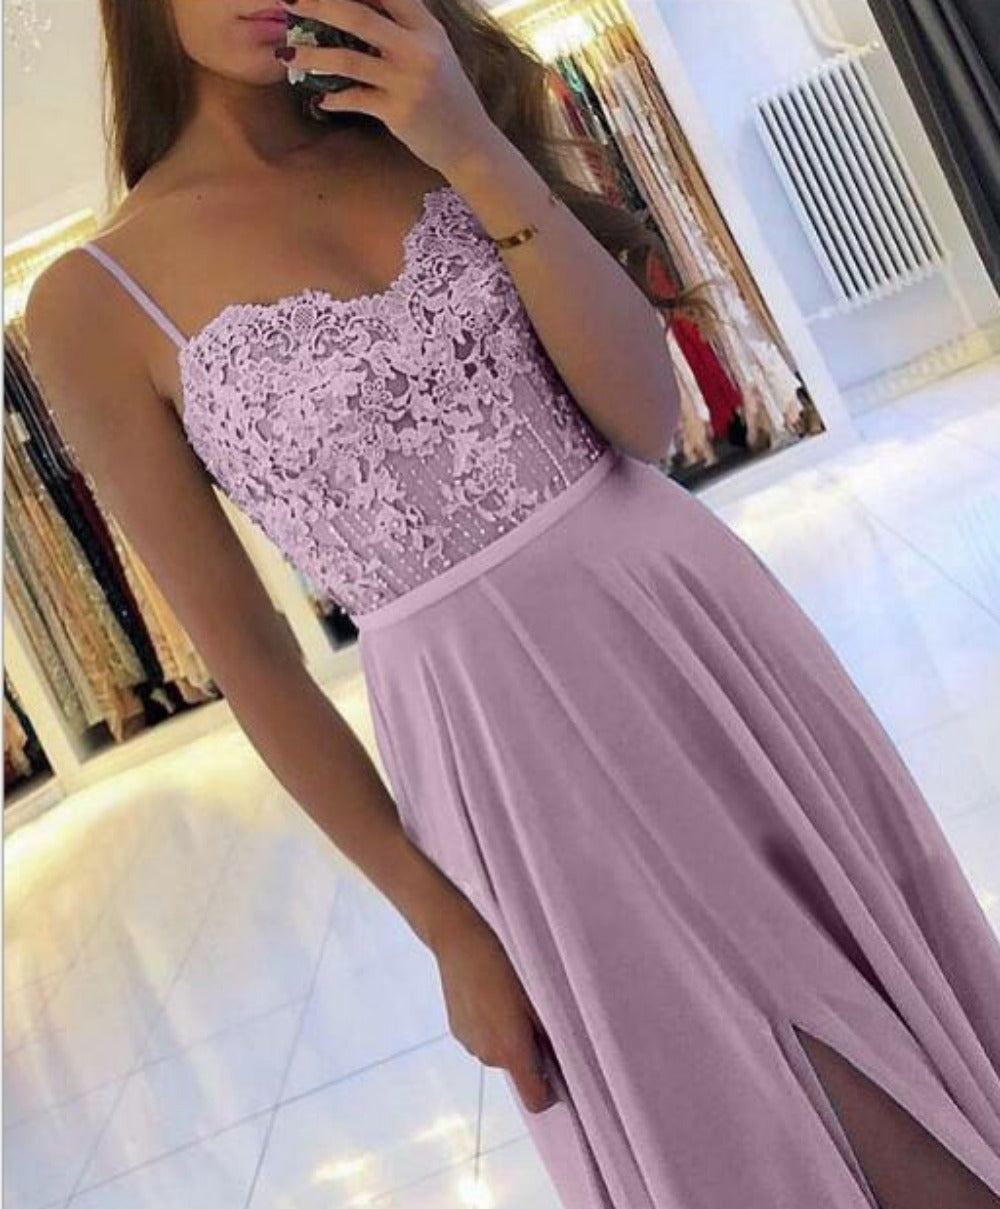 Everyday.Discount buy women prom galadress gowns formal tiktok videos bridal women nigthout gowns dresses pinterest ankle lenght sleeveless straps dresses facebookwomen straps floorlenght weddings lace bust insert dresses fashiondress women's formal dresses coctaildress parties dresses everyday free.shipping